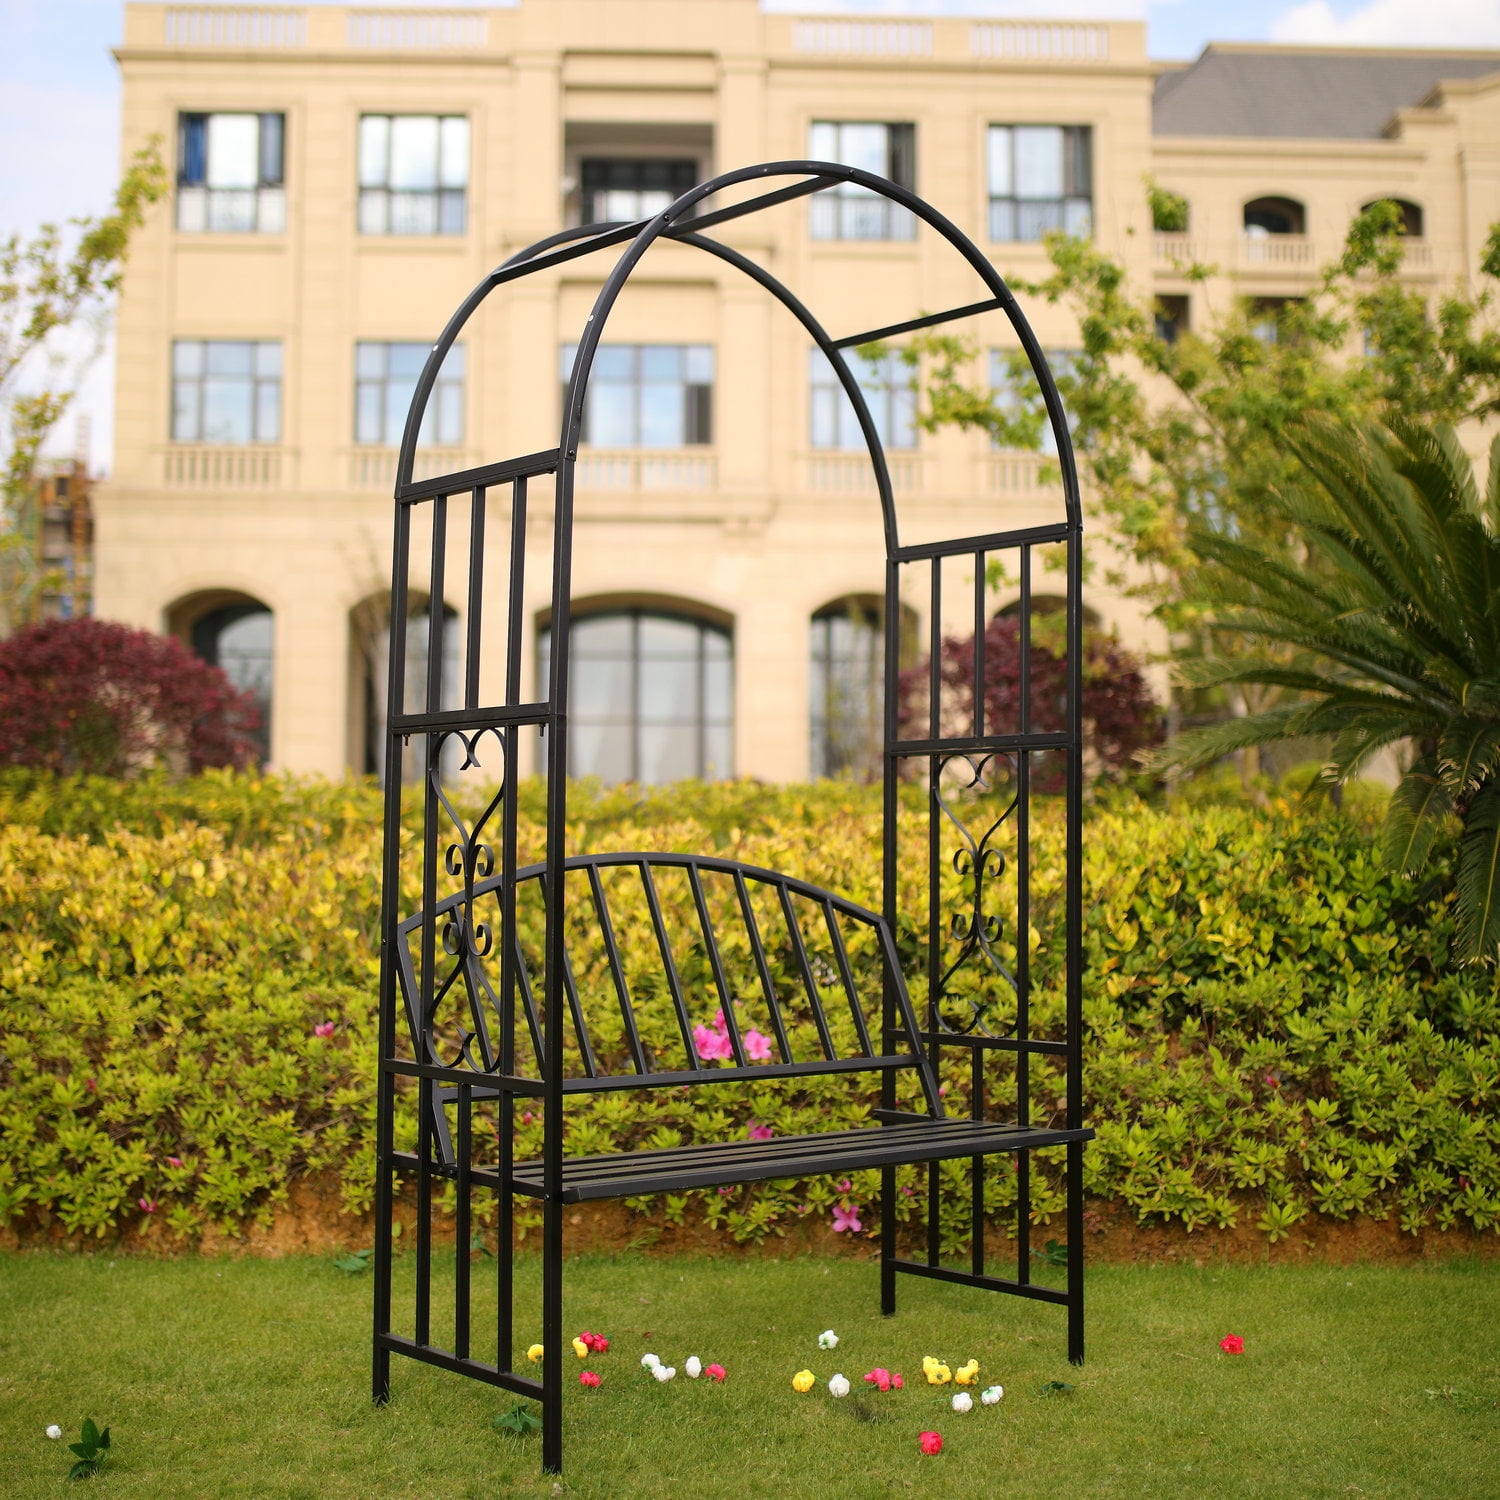 1. GO Steel Garden Arch with Seat for 2 People, 6'7